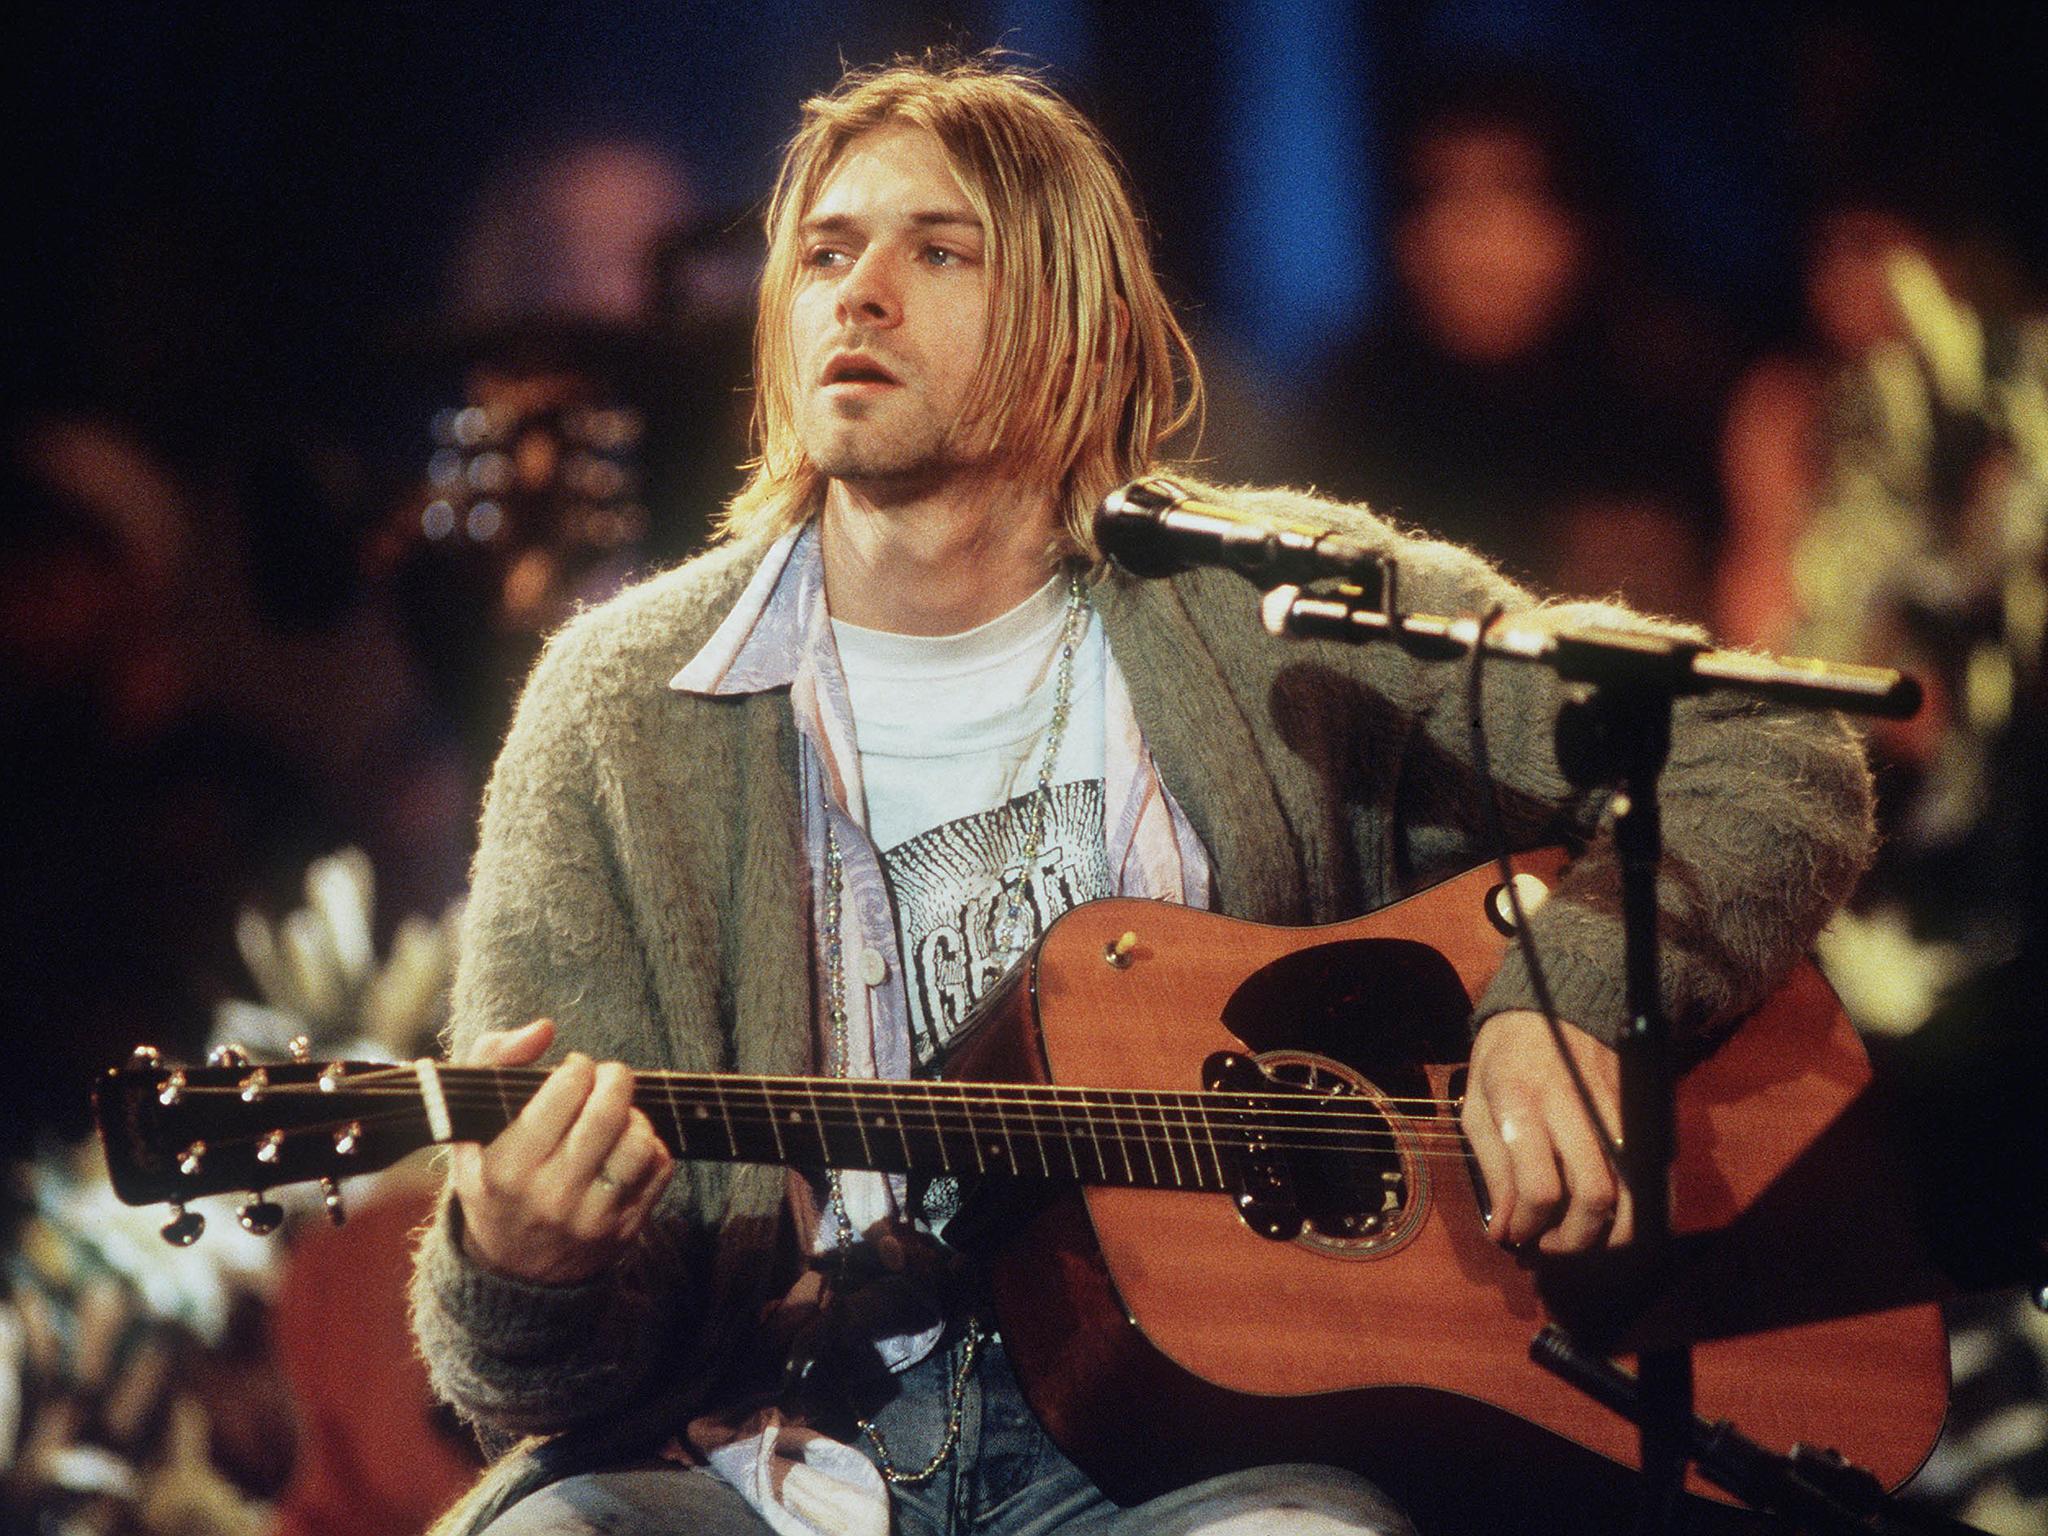 In bloom: Cobain during the taping of MTV Unplugged in 1993